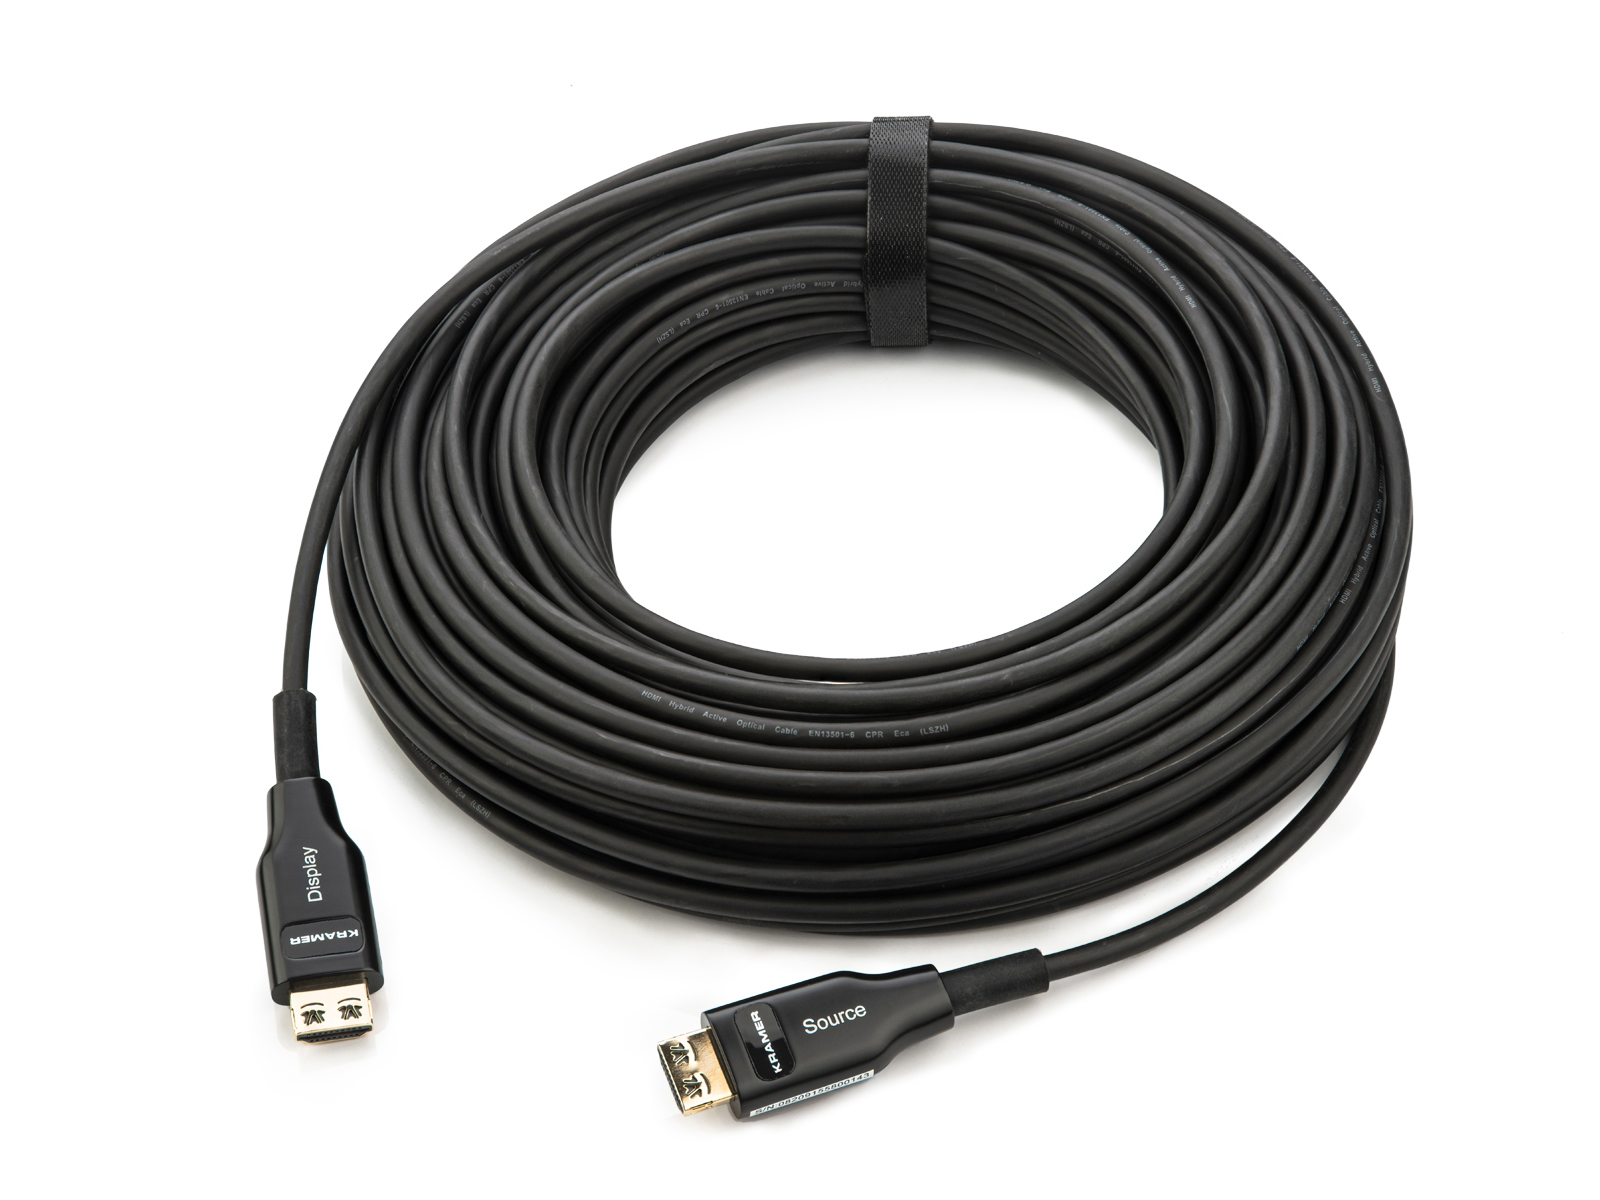 CP-AOCH/60F-131 40m/131ft High-Speed HDMI Optic Hybrid Cable - Plenum Rated by Kramer